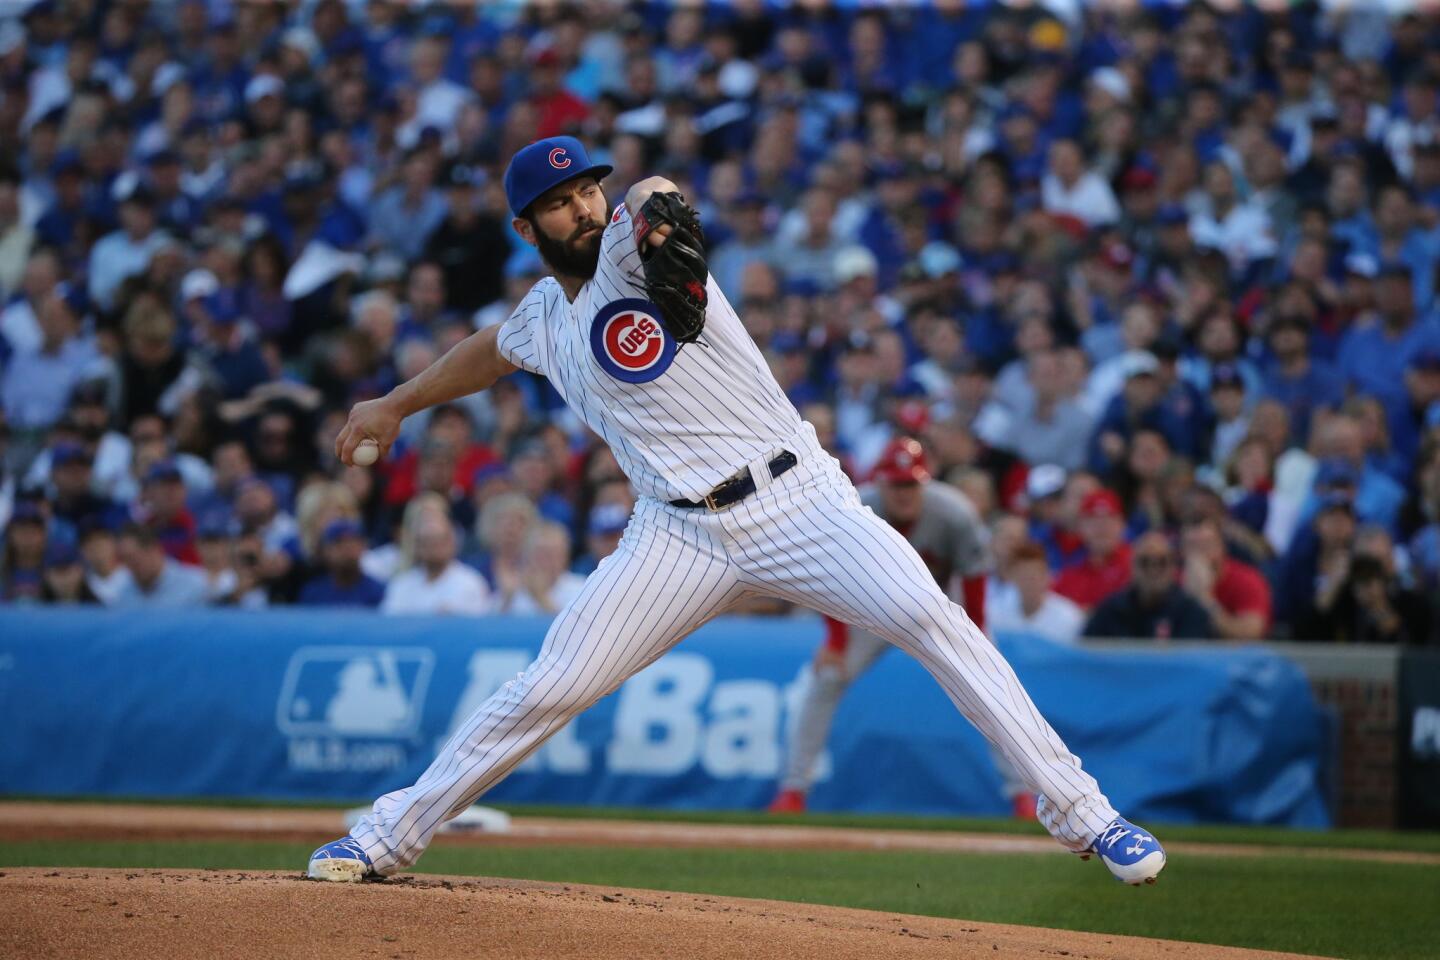 Jake Arrieta won the Cy Young in 2015.